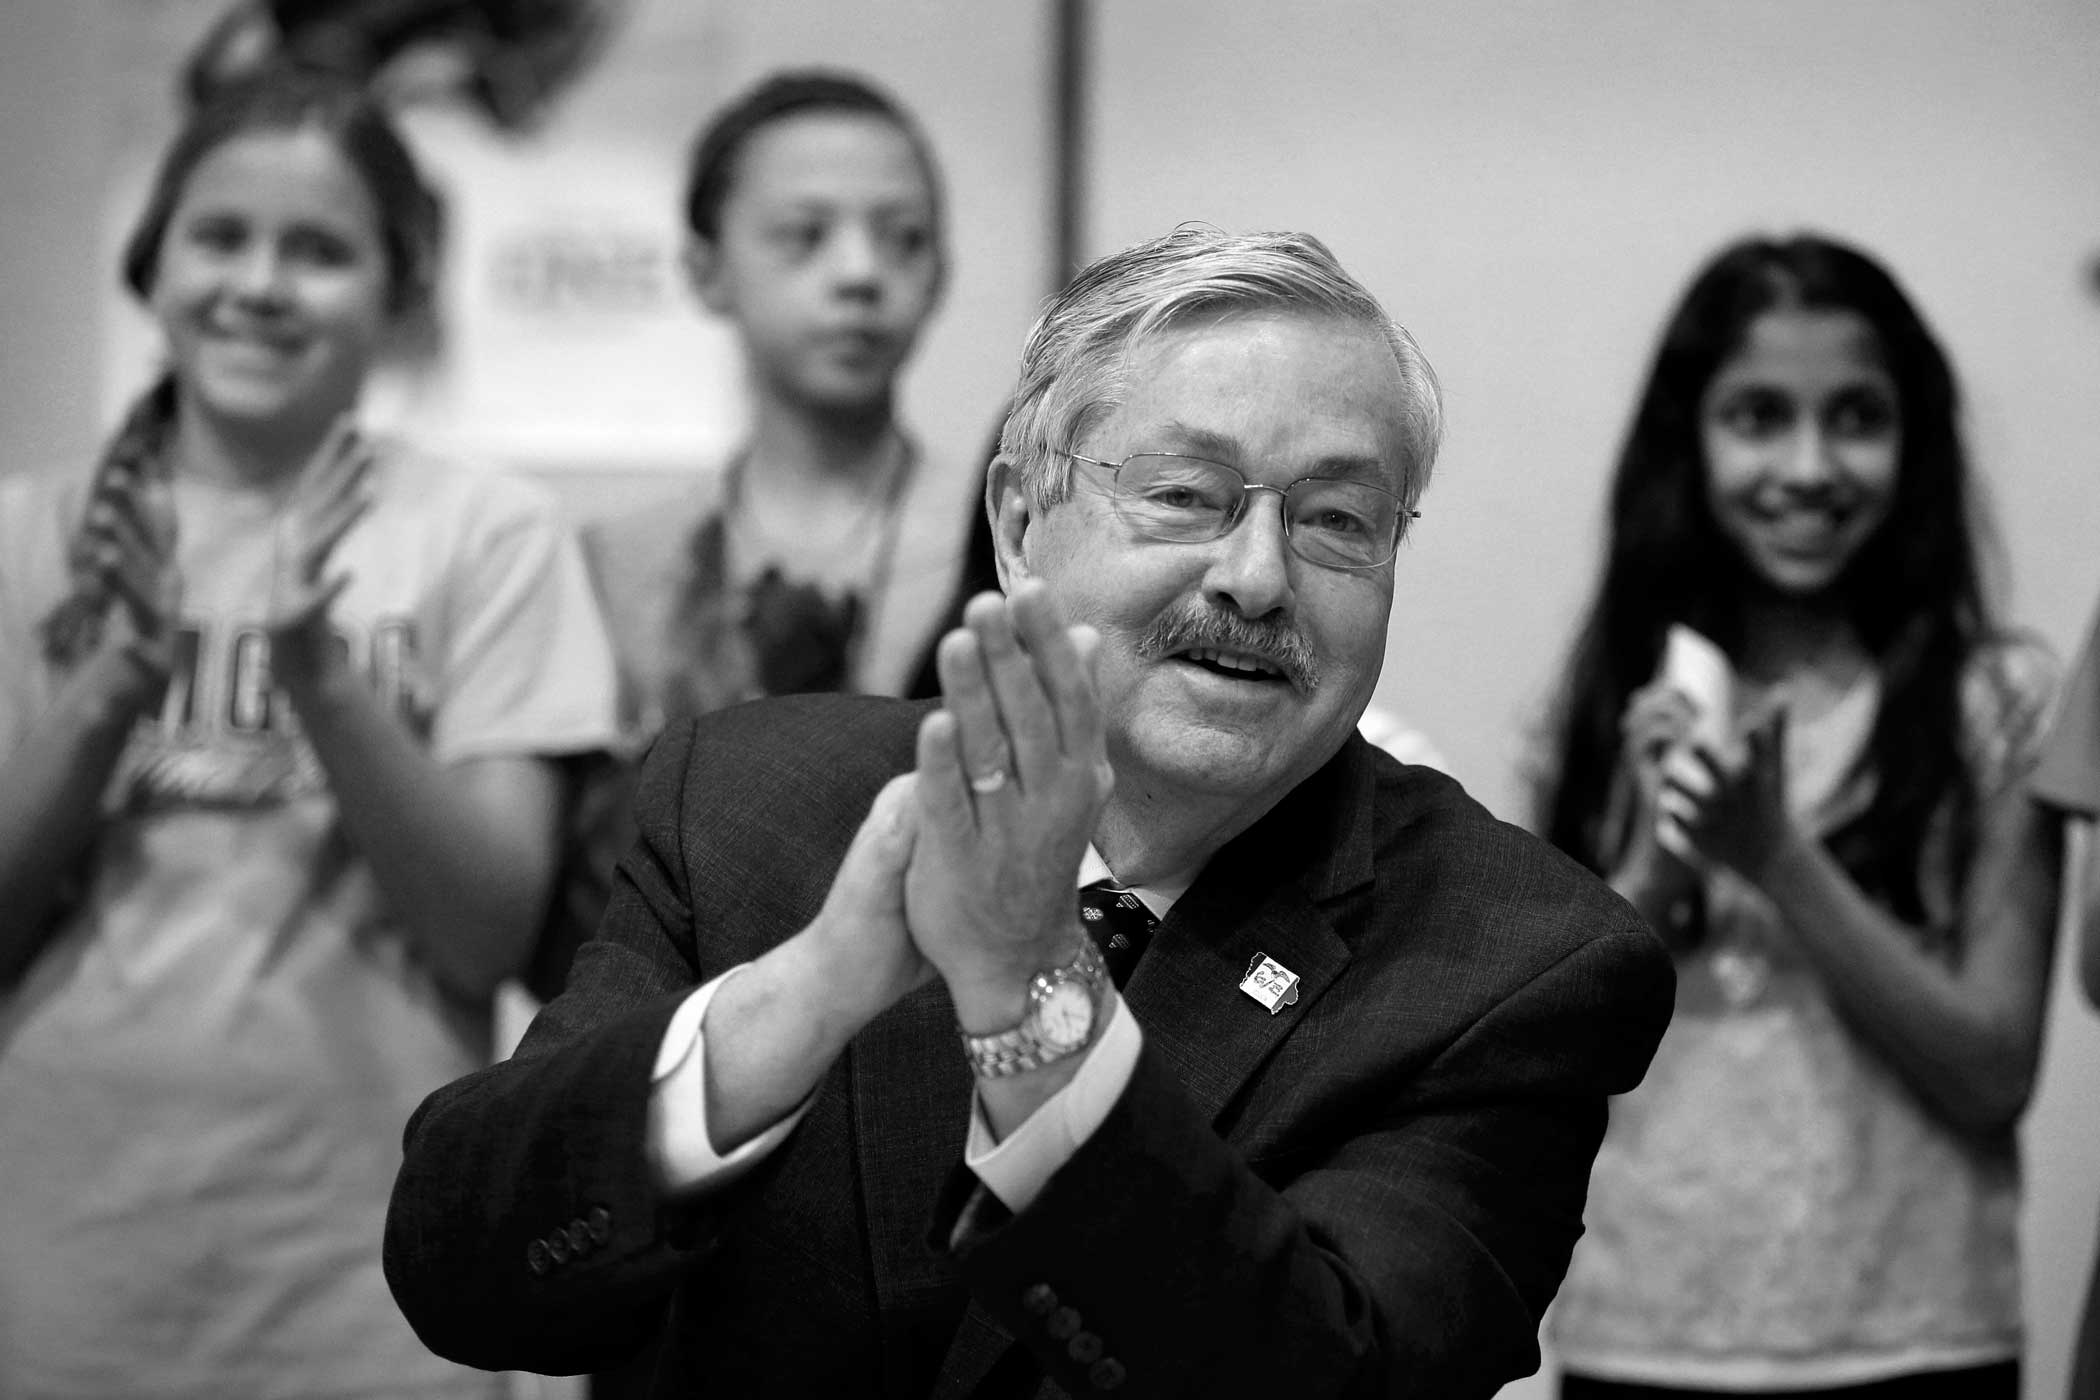 Iowa Gov. Terry Branstad at a proclamation signing at Jordan Creek Elementary School, in West Des Moines, Iowa. On Dec. 14, the six-term Republican marks his 7,642nd day of service as governor, making him the longest-serving governor in American history.